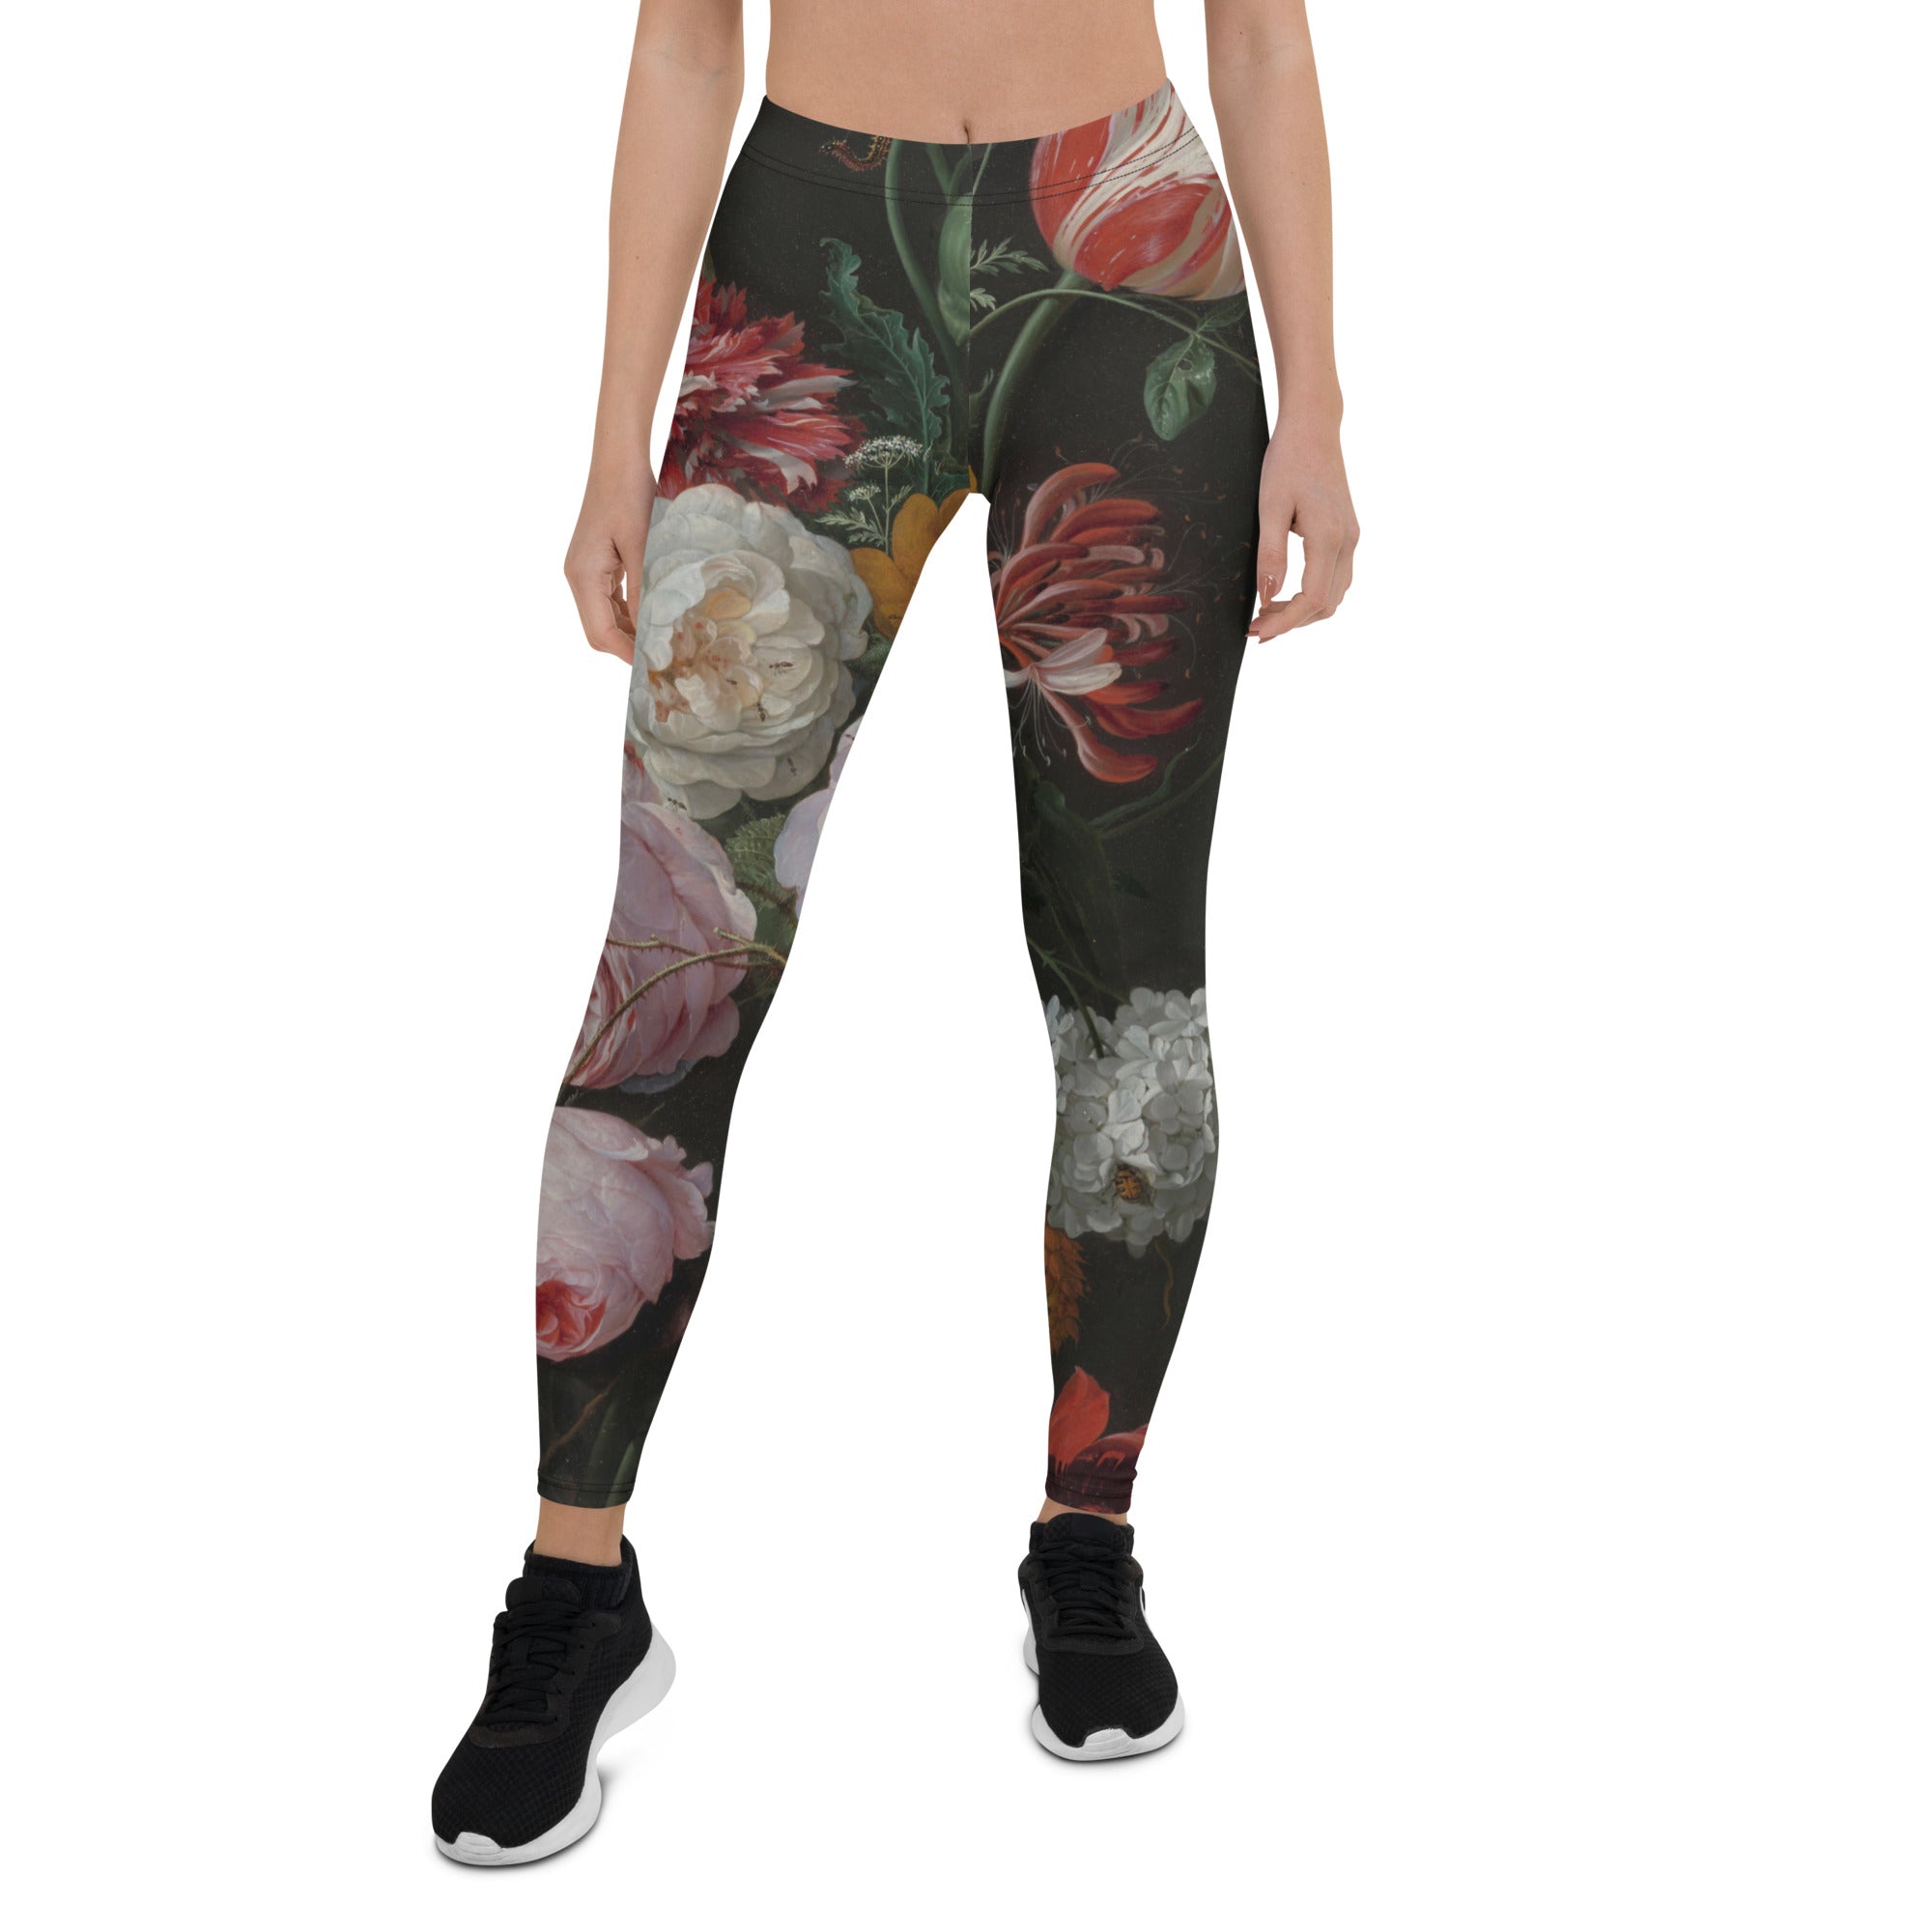 How to choose the right yoga leggings? – Relax